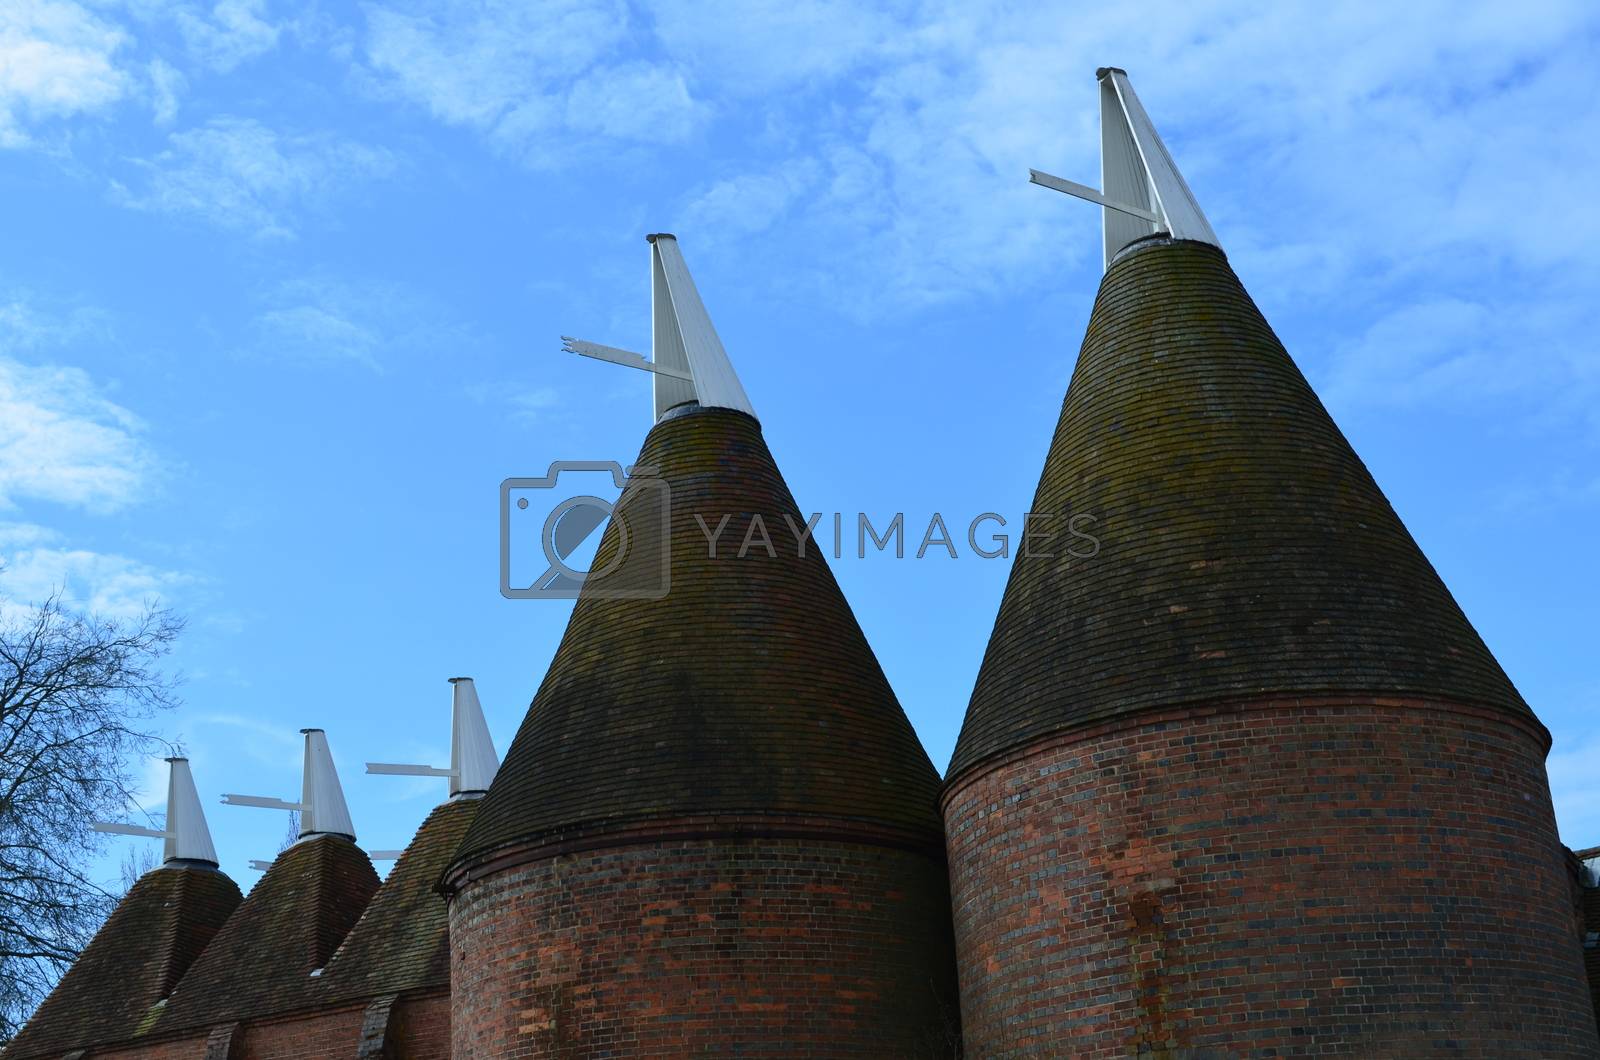 Royalty free image of Traditional Kent Oast House's. by bunsview